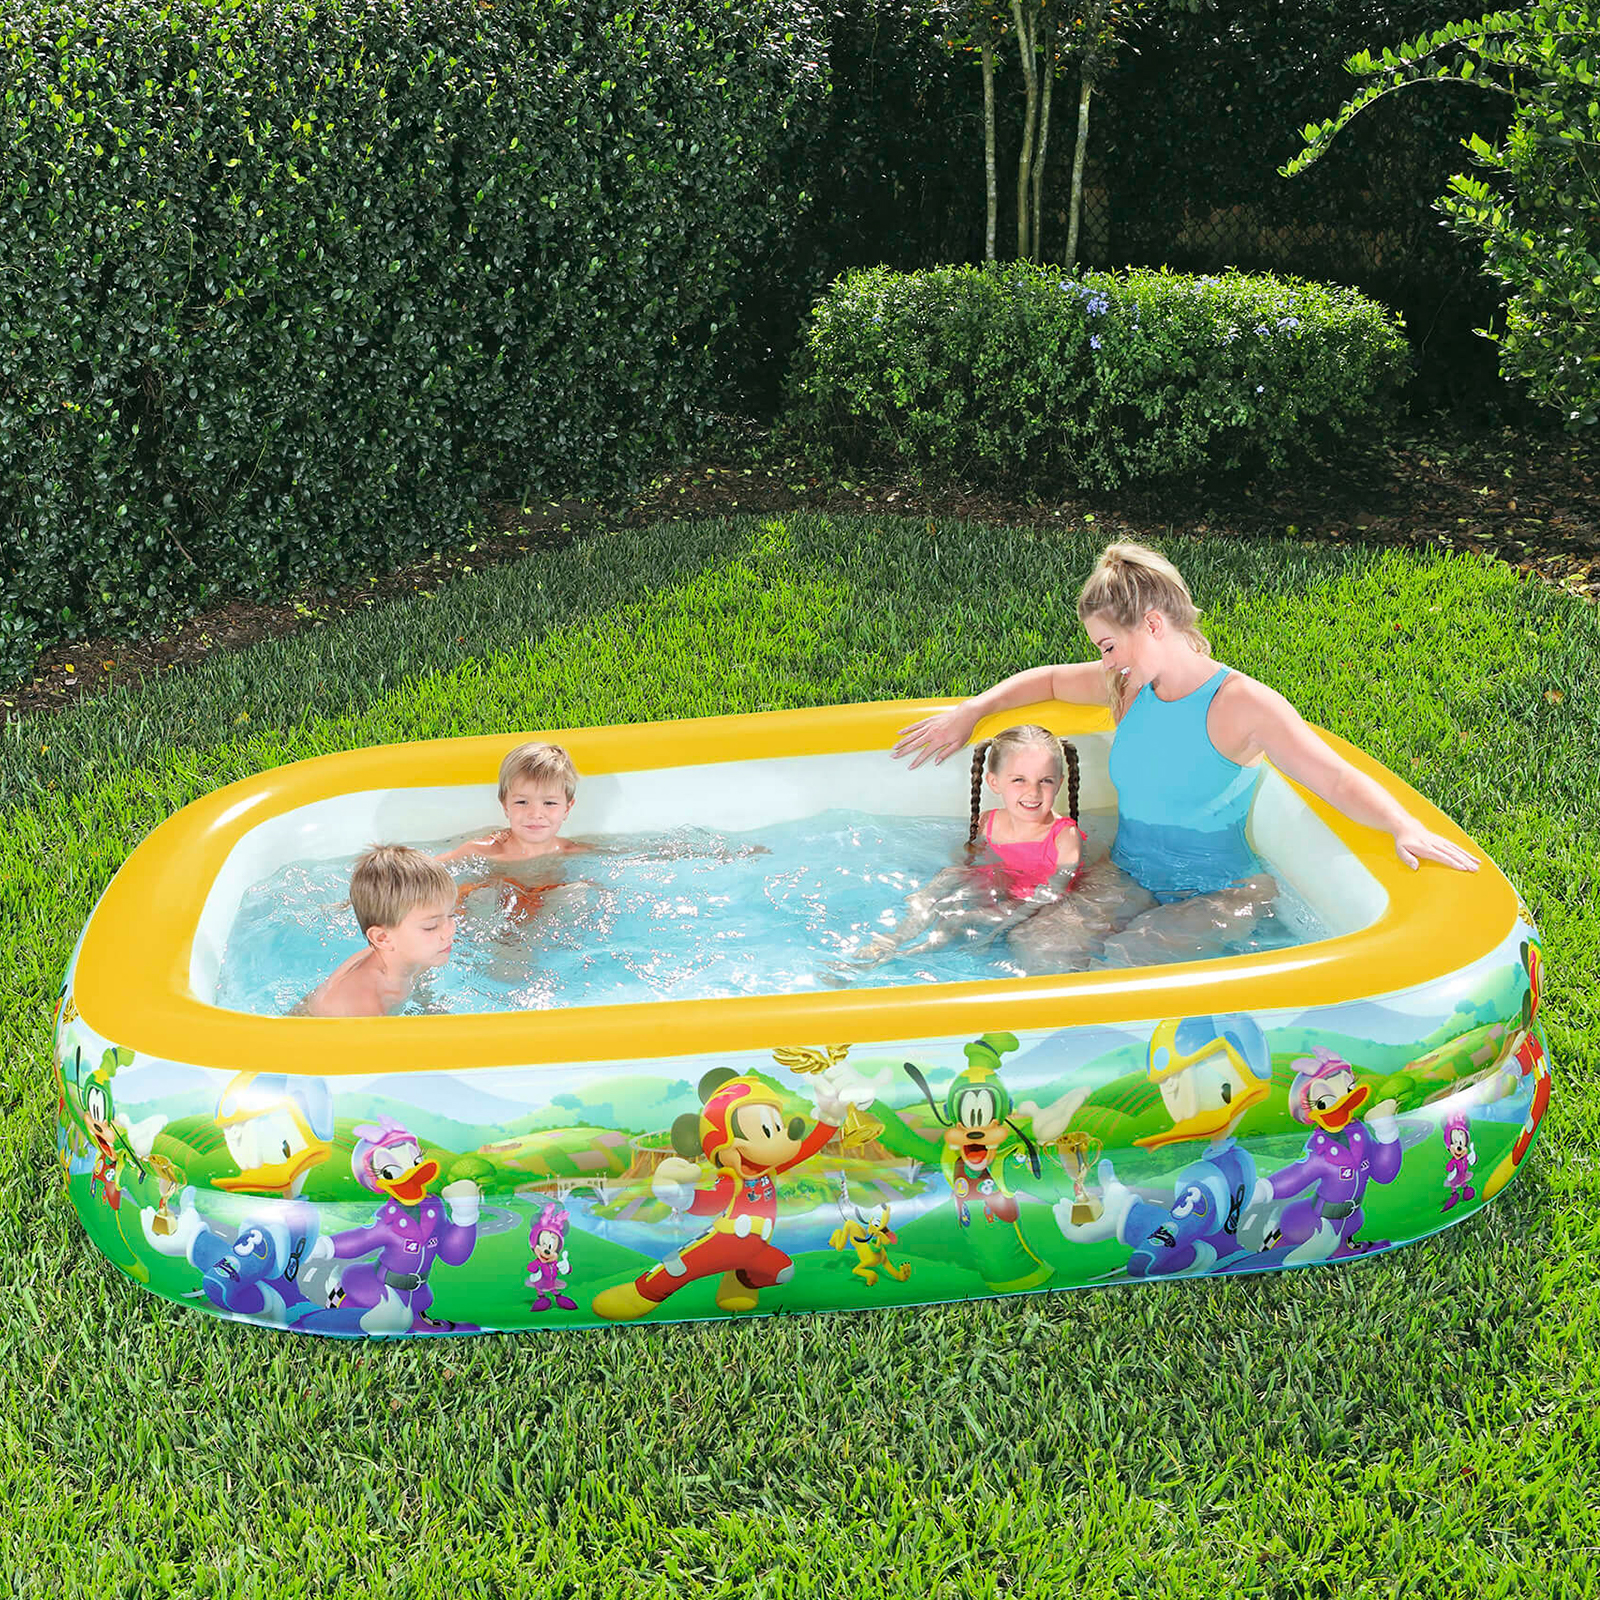 Piscina Hinchable Autoportante Infantil Bestway 262x175x51 Cm Diseño Mickey And The Roadster Racers